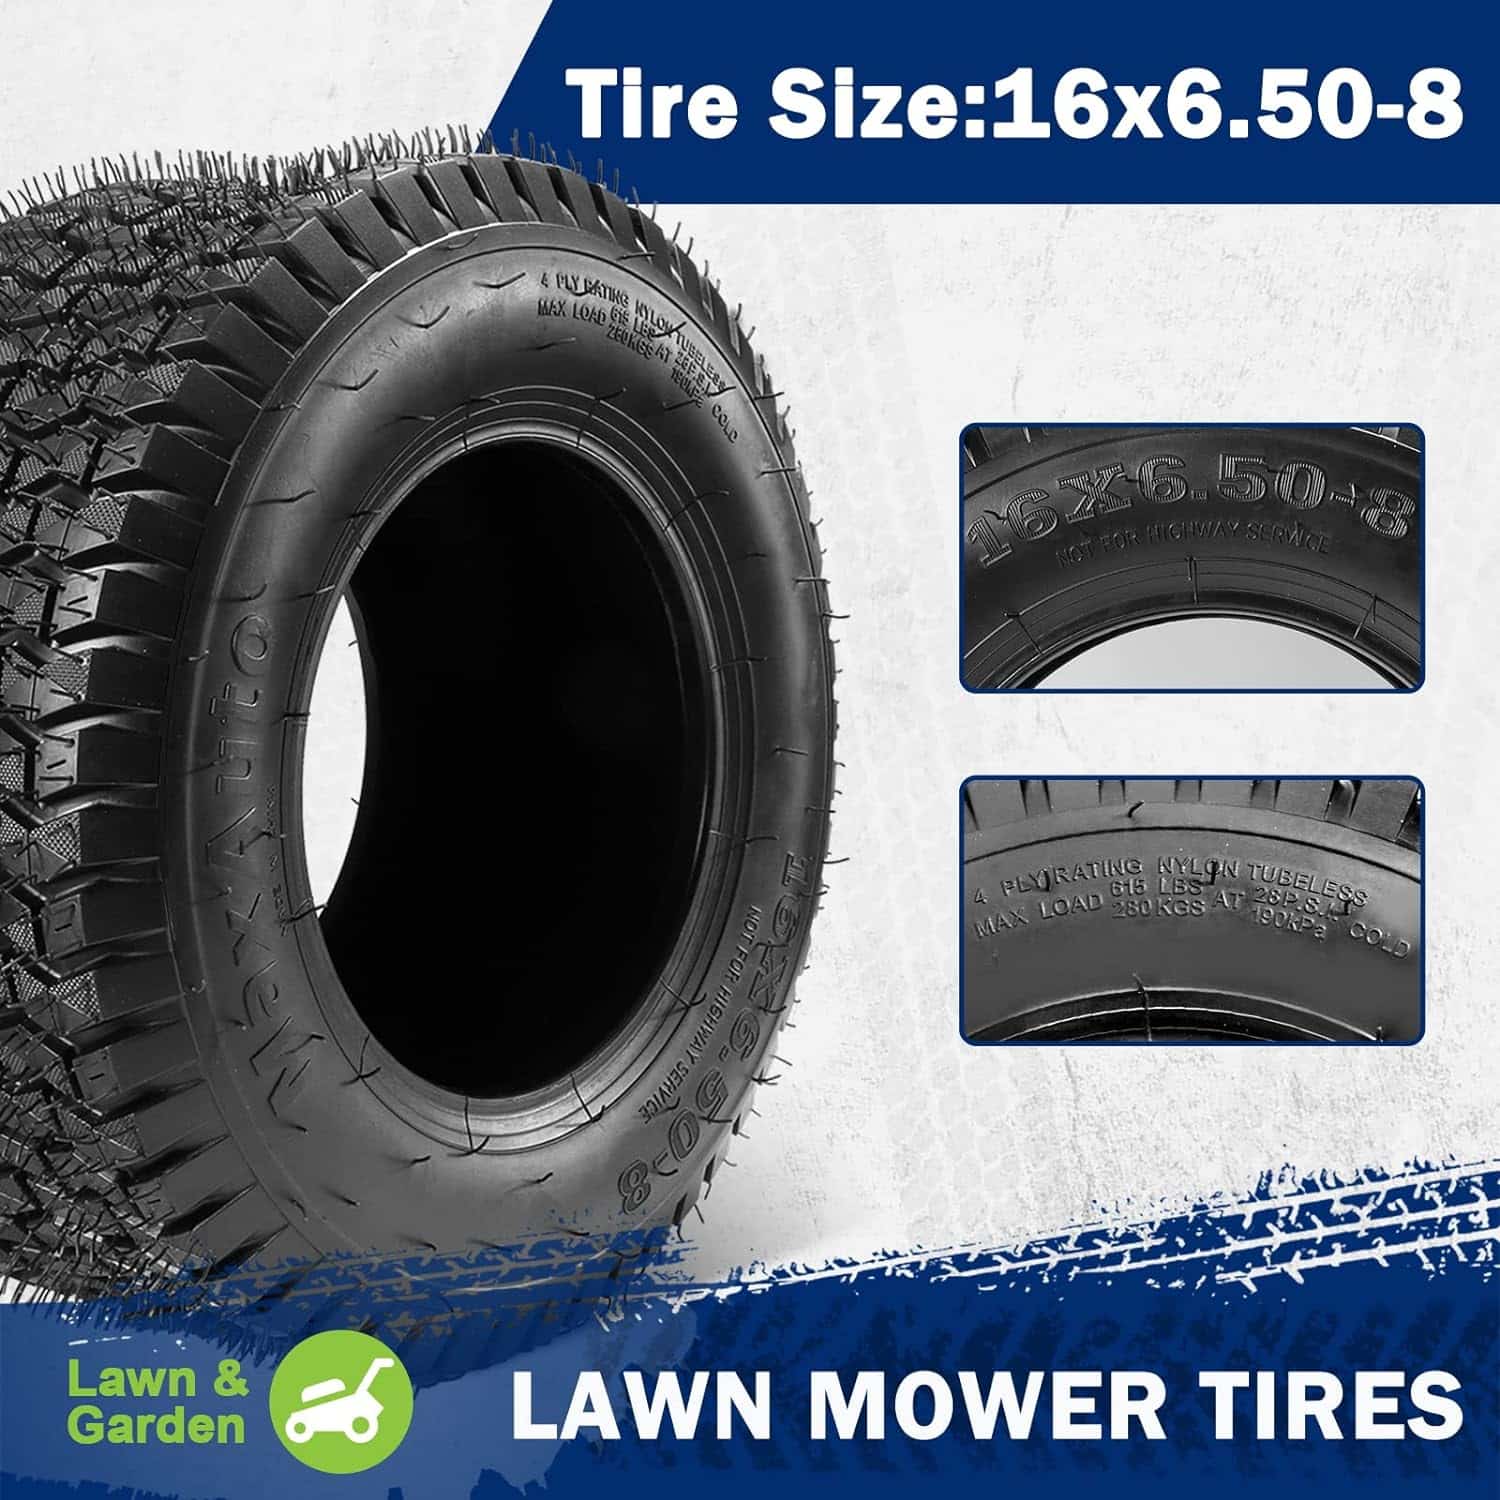 MaxAuto FOX 16x6.50x8 Lawn Tractor Tires: A Review of the Patent Design Fox V1 4Ply Tubeless Riding Mower Tire